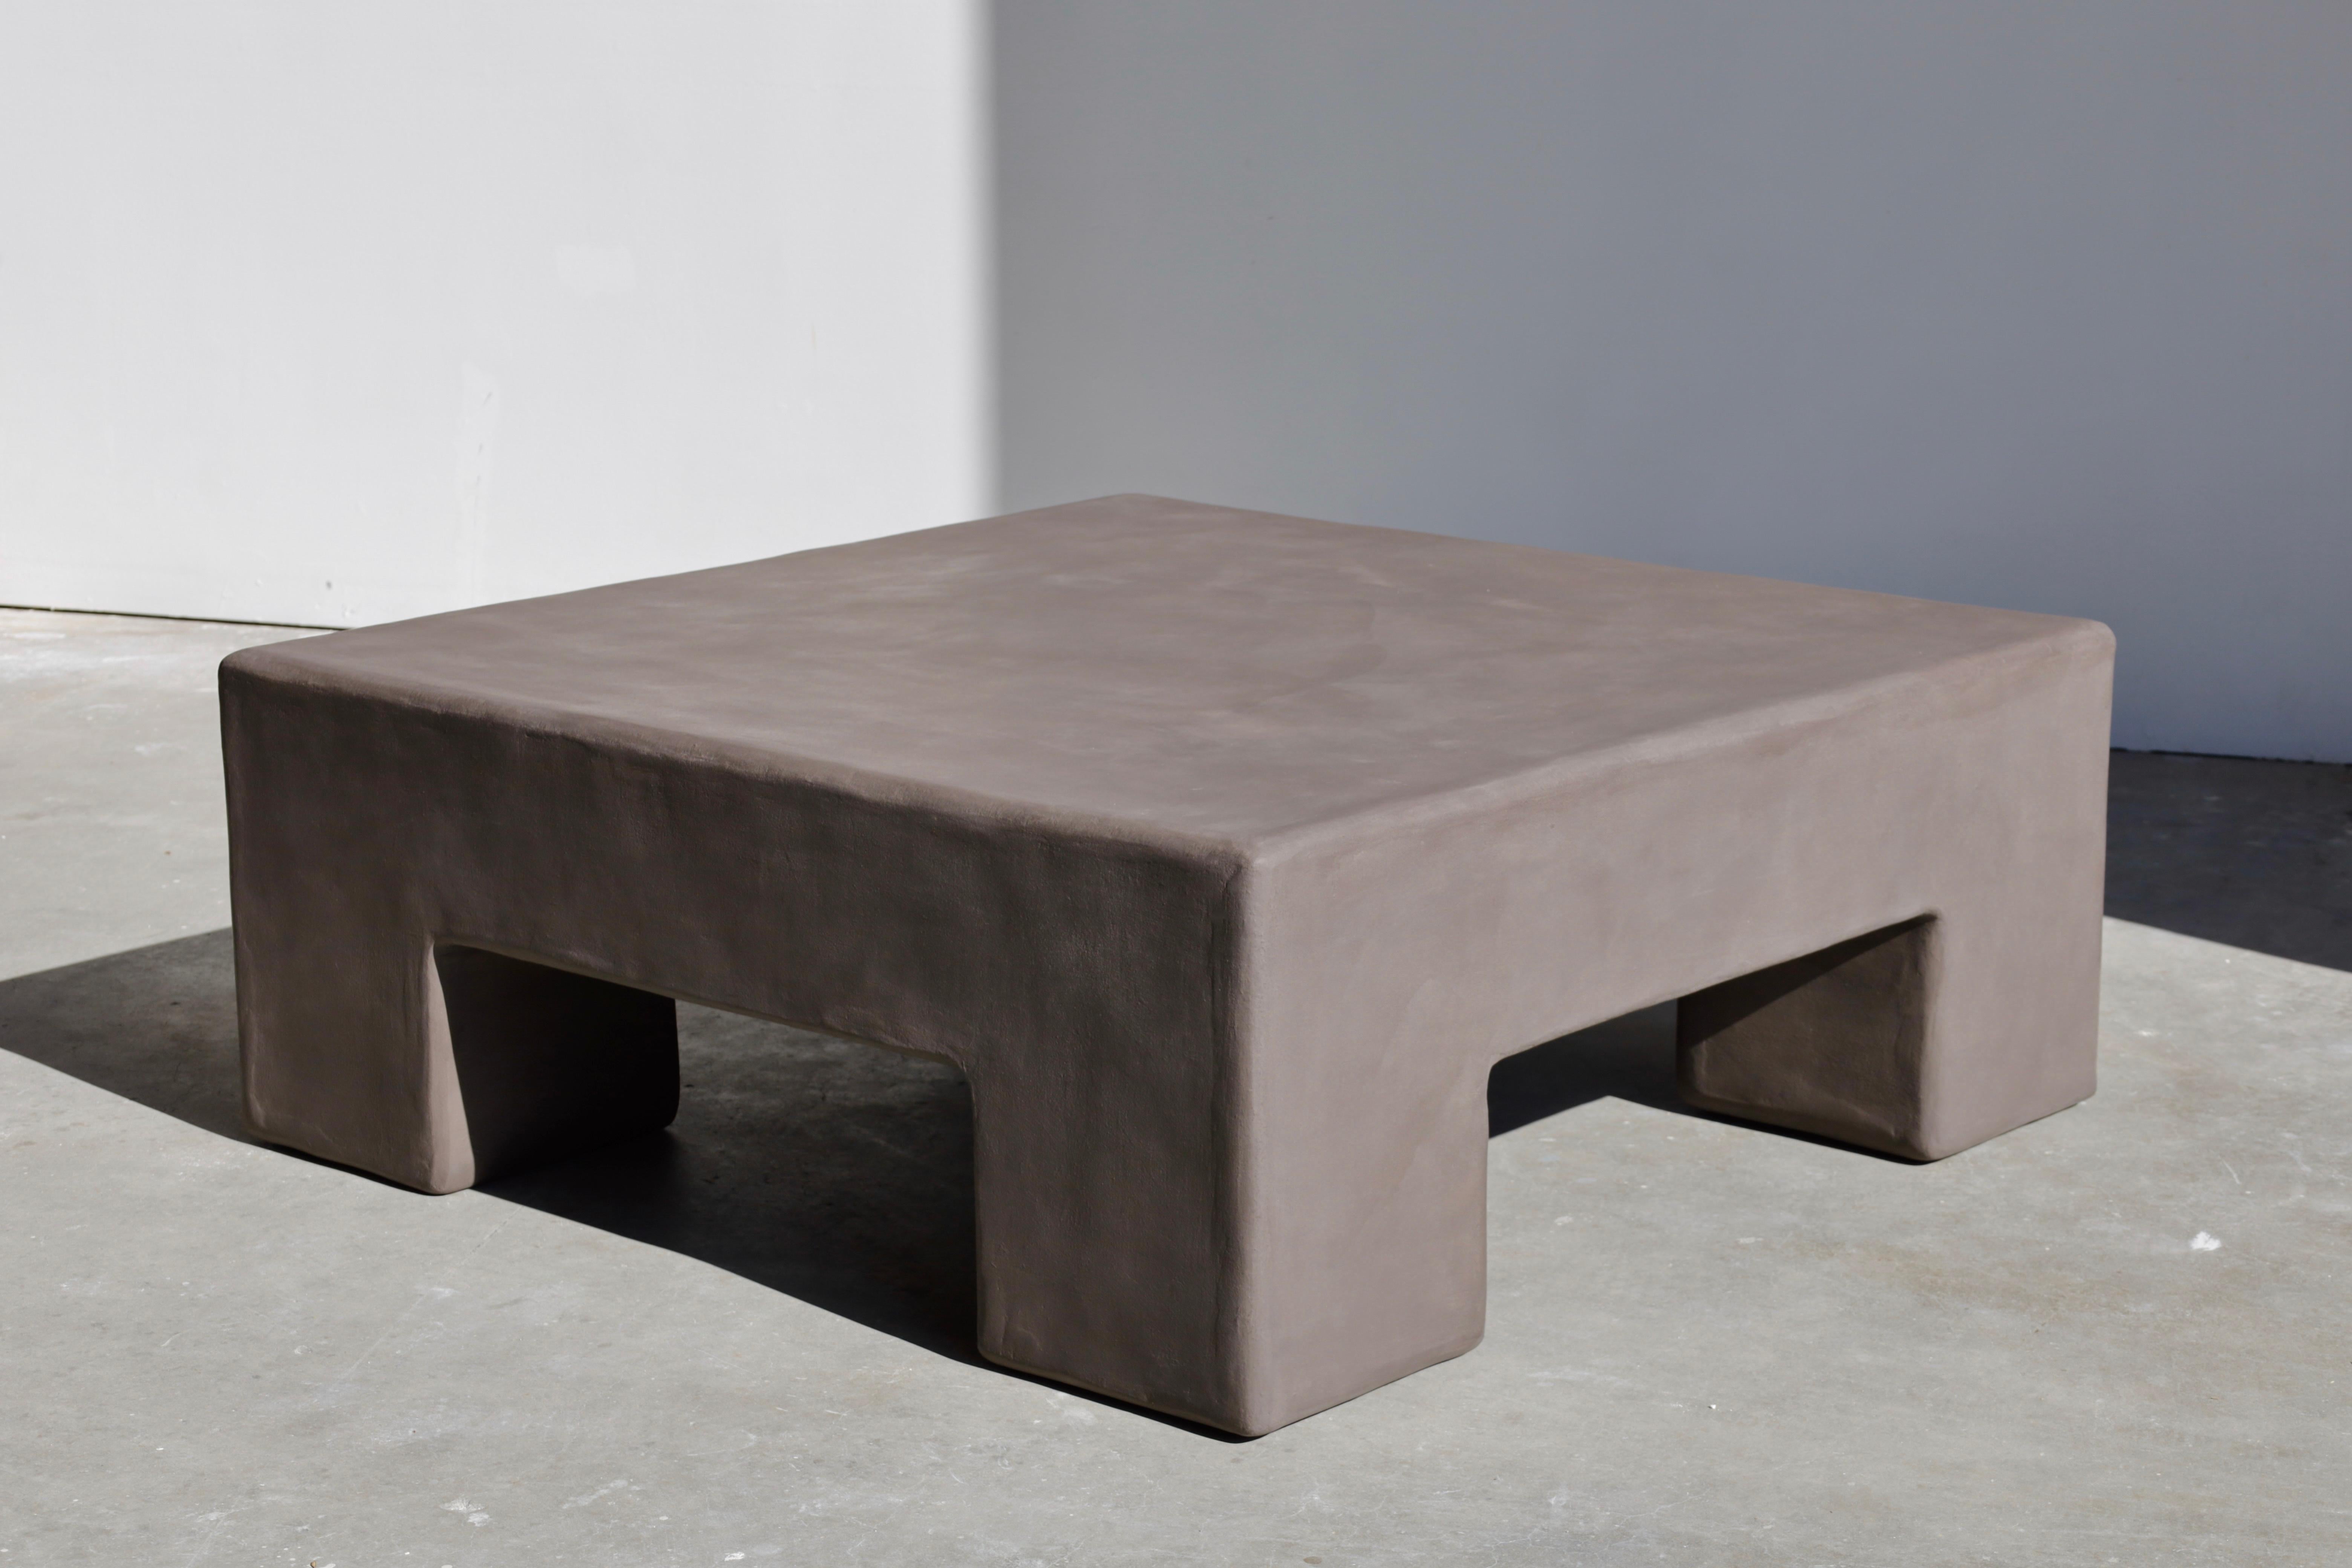 our signature coffee table, in atacama color

a simple and modern piece that will work with many decors, in the manner of Milo Baughman 

each öken house studio piece is handmade & made to order by a small team of plaster artisans and we try to